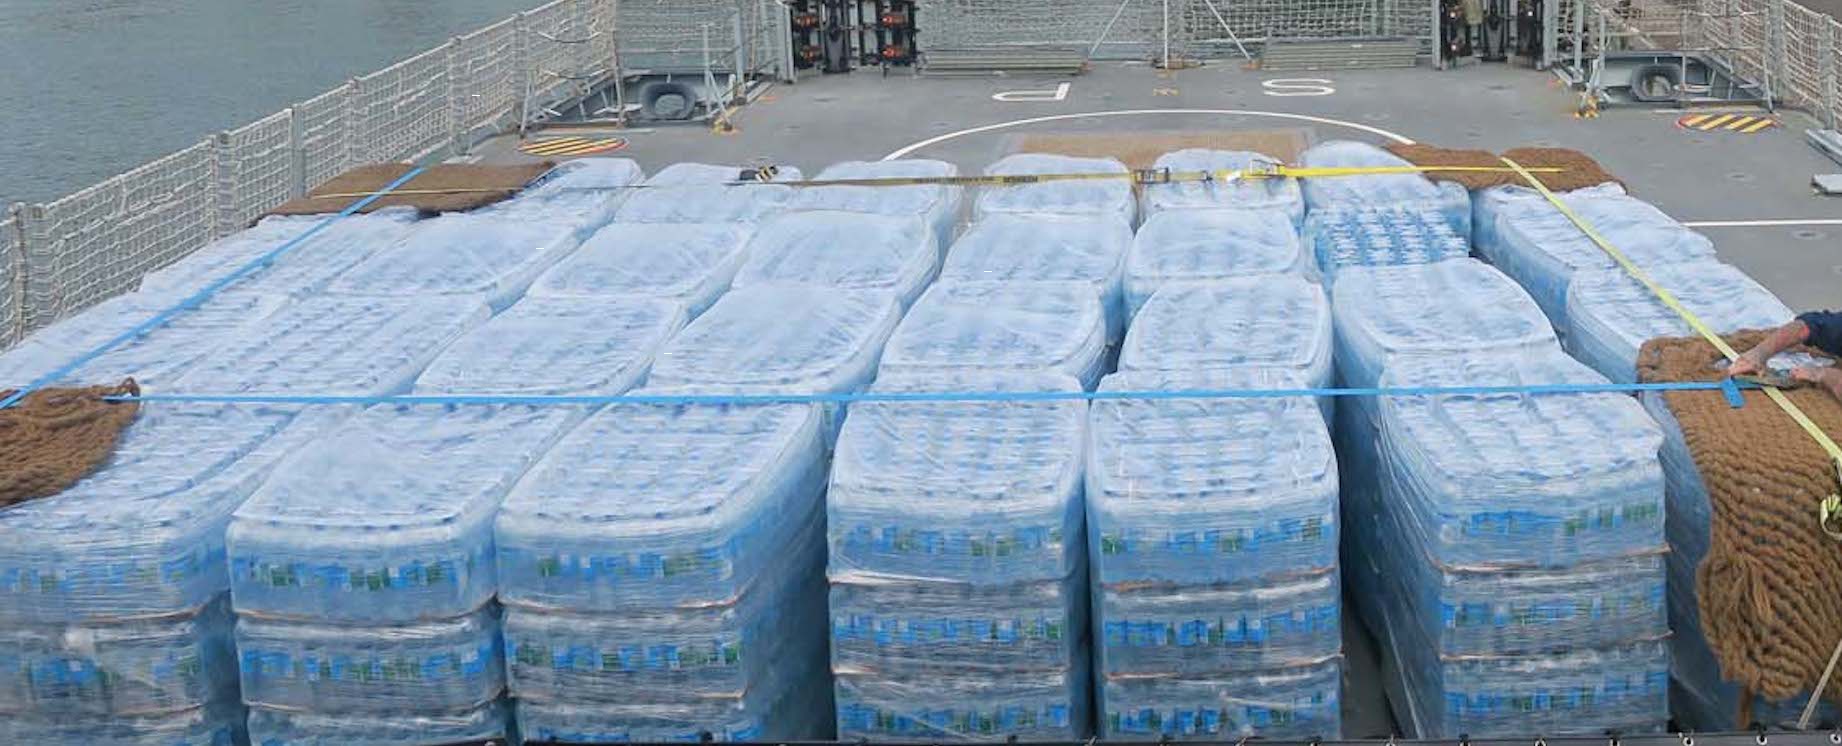 Reducing the growing reliance on bottled water - IF